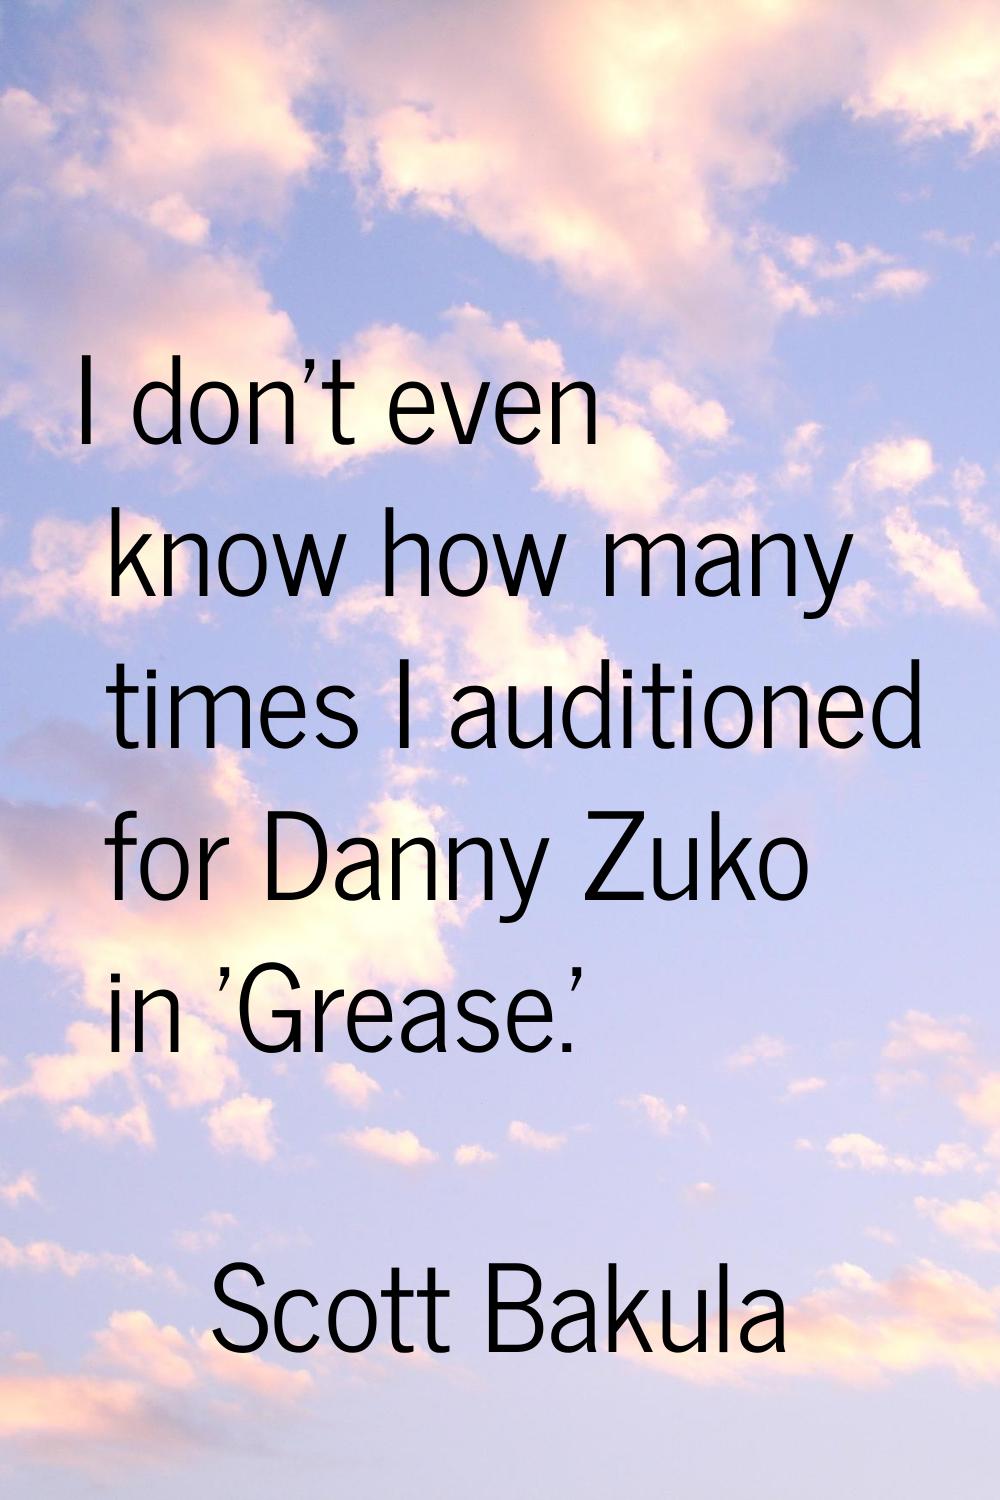 I don't even know how many times I auditioned for Danny Zuko in 'Grease.'